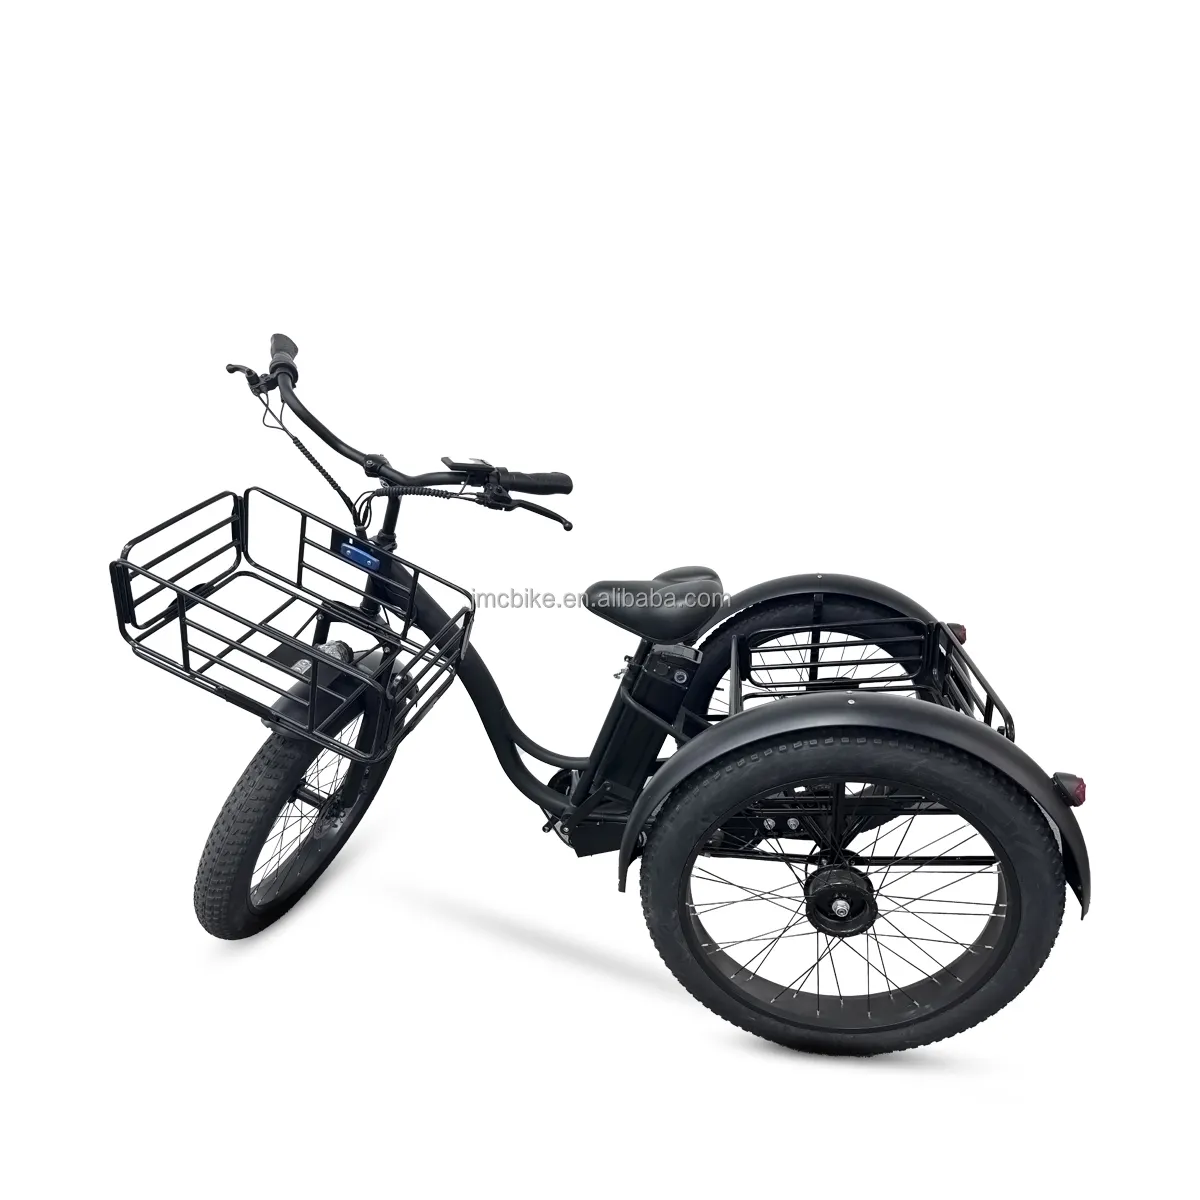 Holiday Picnics 500W Motor 20 inch 3 Wheel 7 Speed Trikes Adult Tricycles Bike with Basket